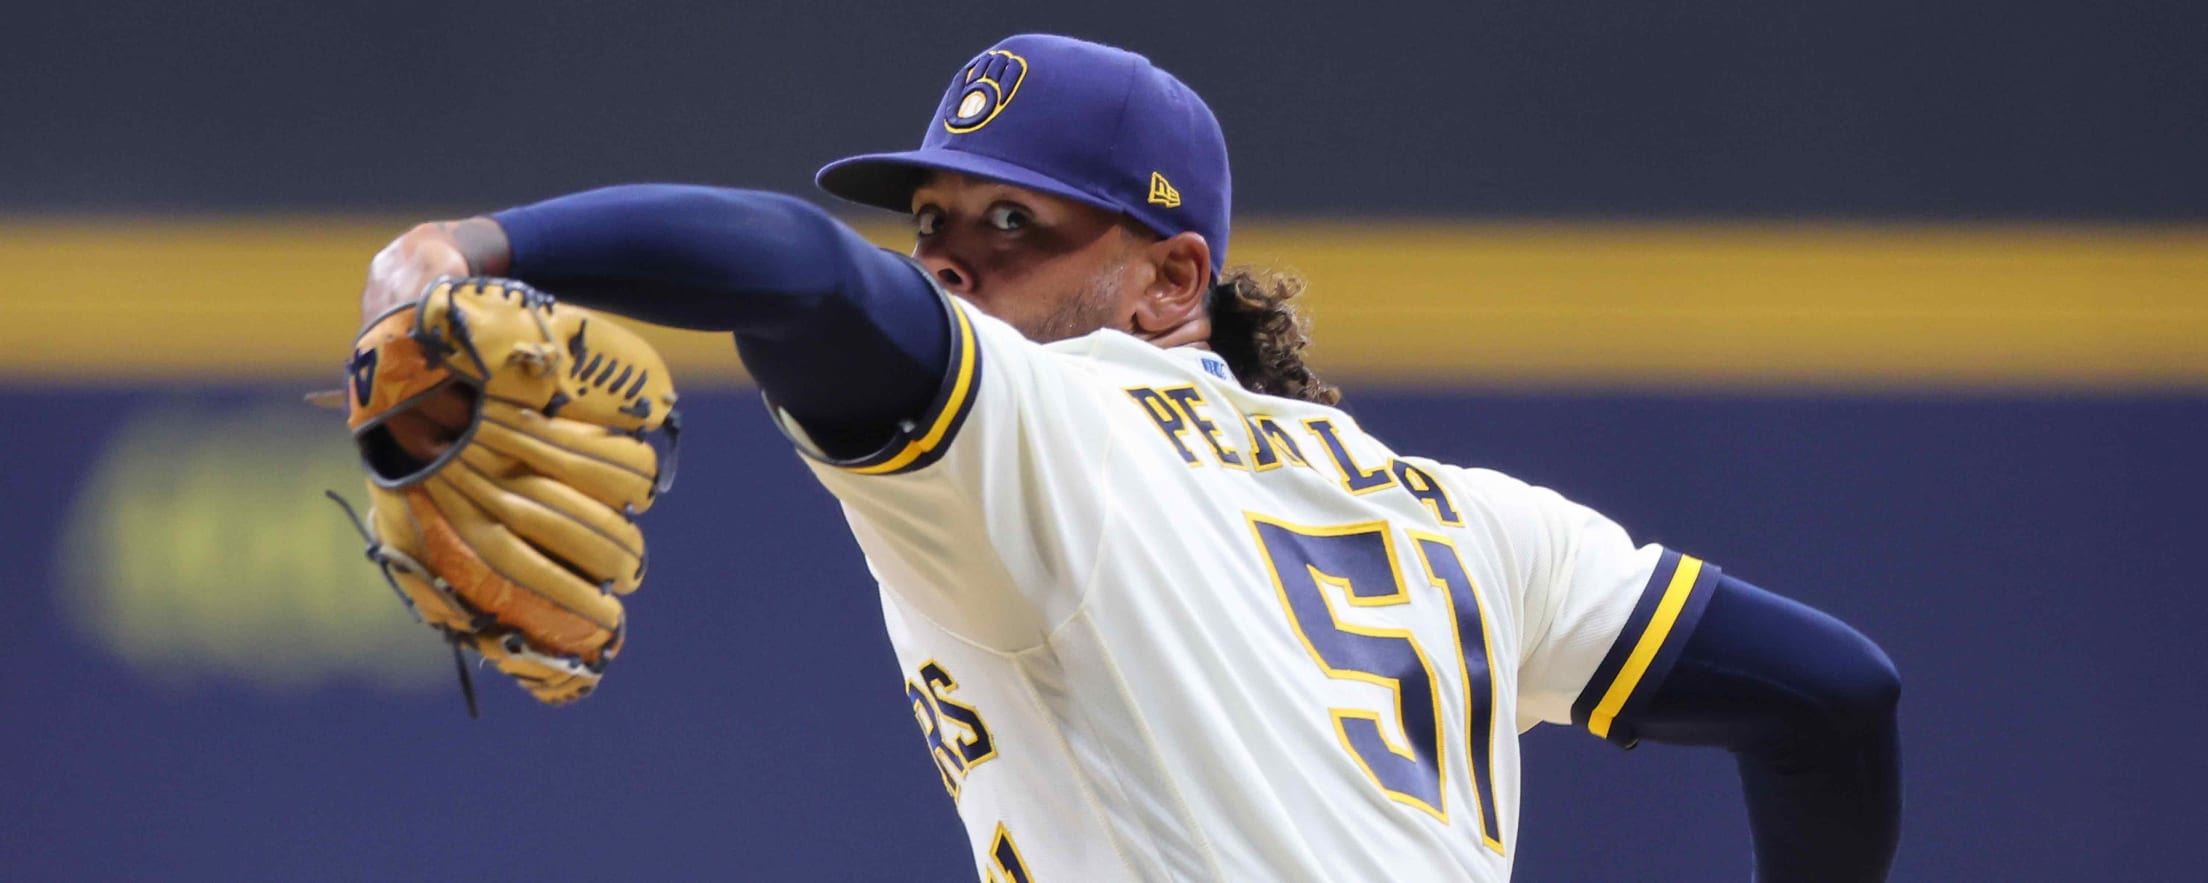 4 storylines to watch for the Milwaukee Brewers this offseason